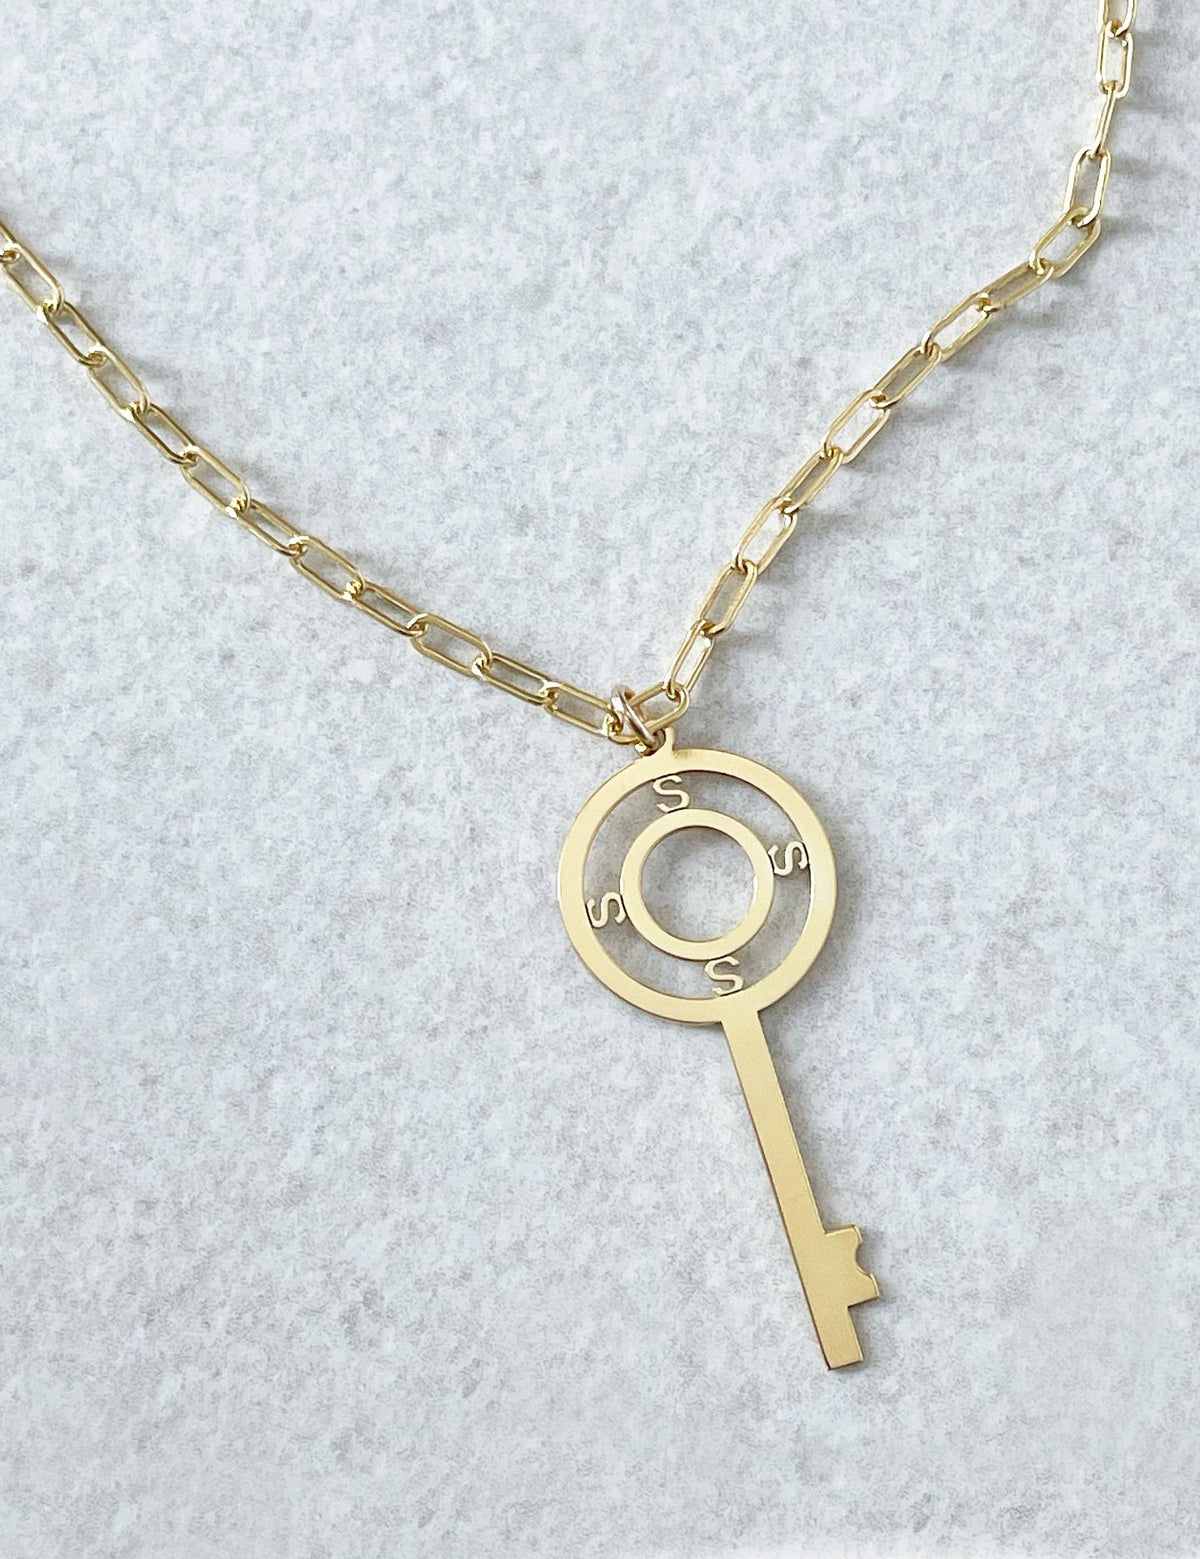 Sarah Personalized Lock and Key Necklace